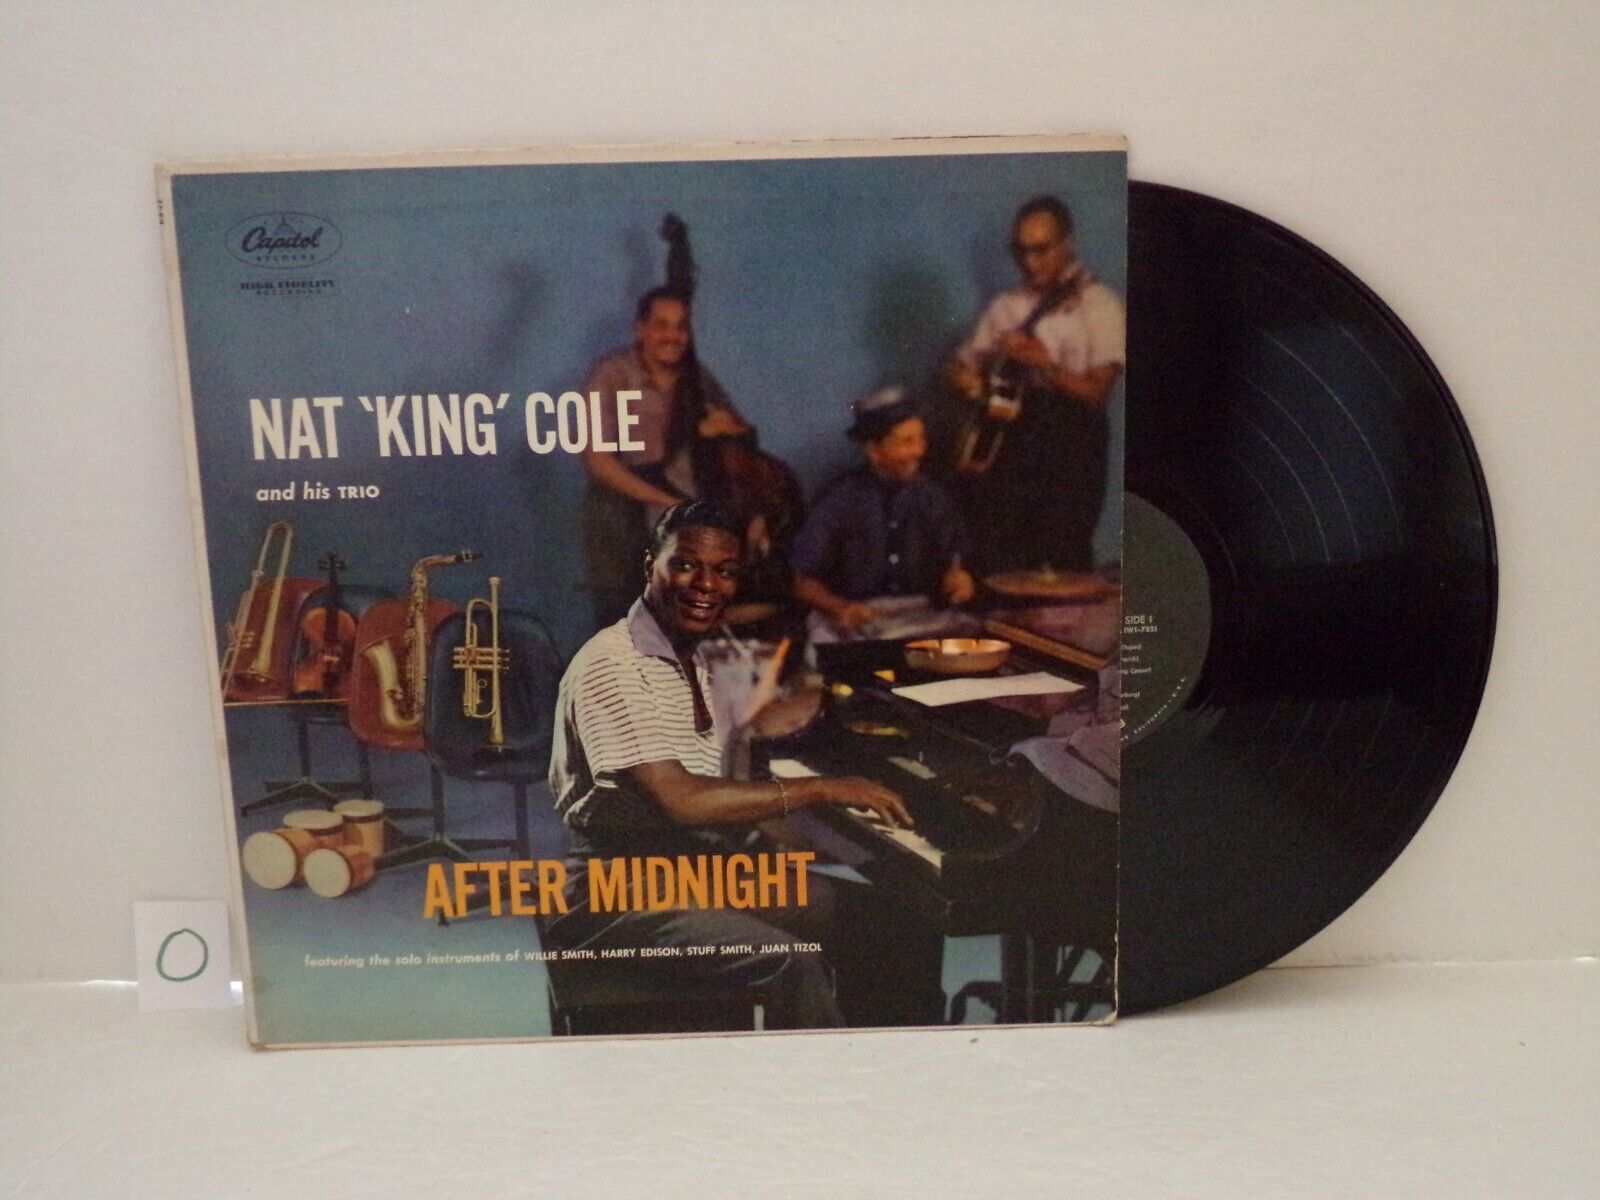 Nat King Cole And His Trio After Midnight 33 RPM Vinyl Album 1956